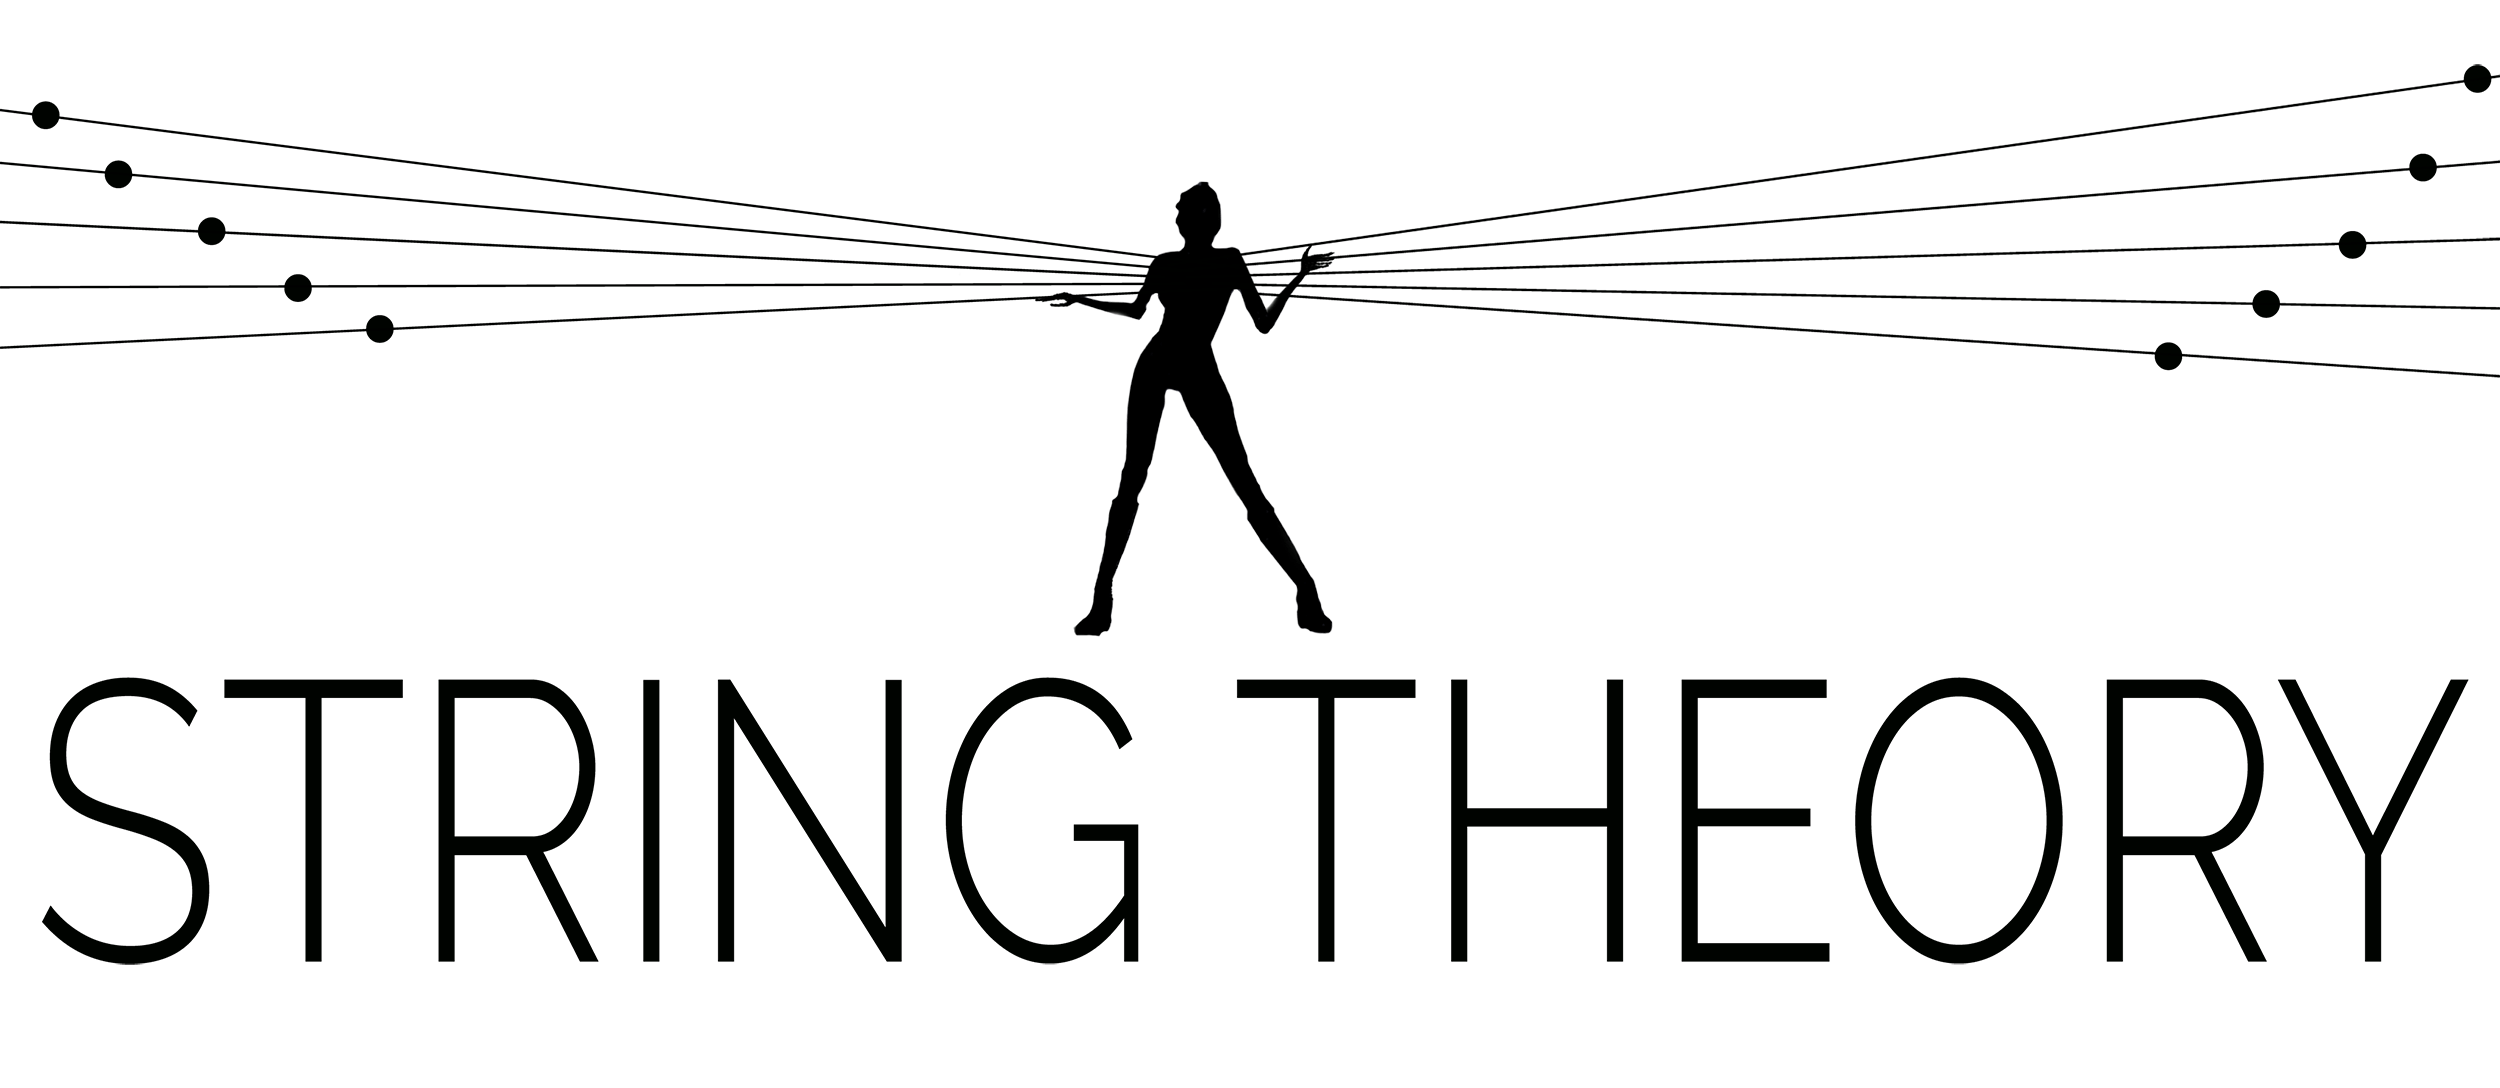 String Logo - Los Angeles Times | Press - String Theory Productions